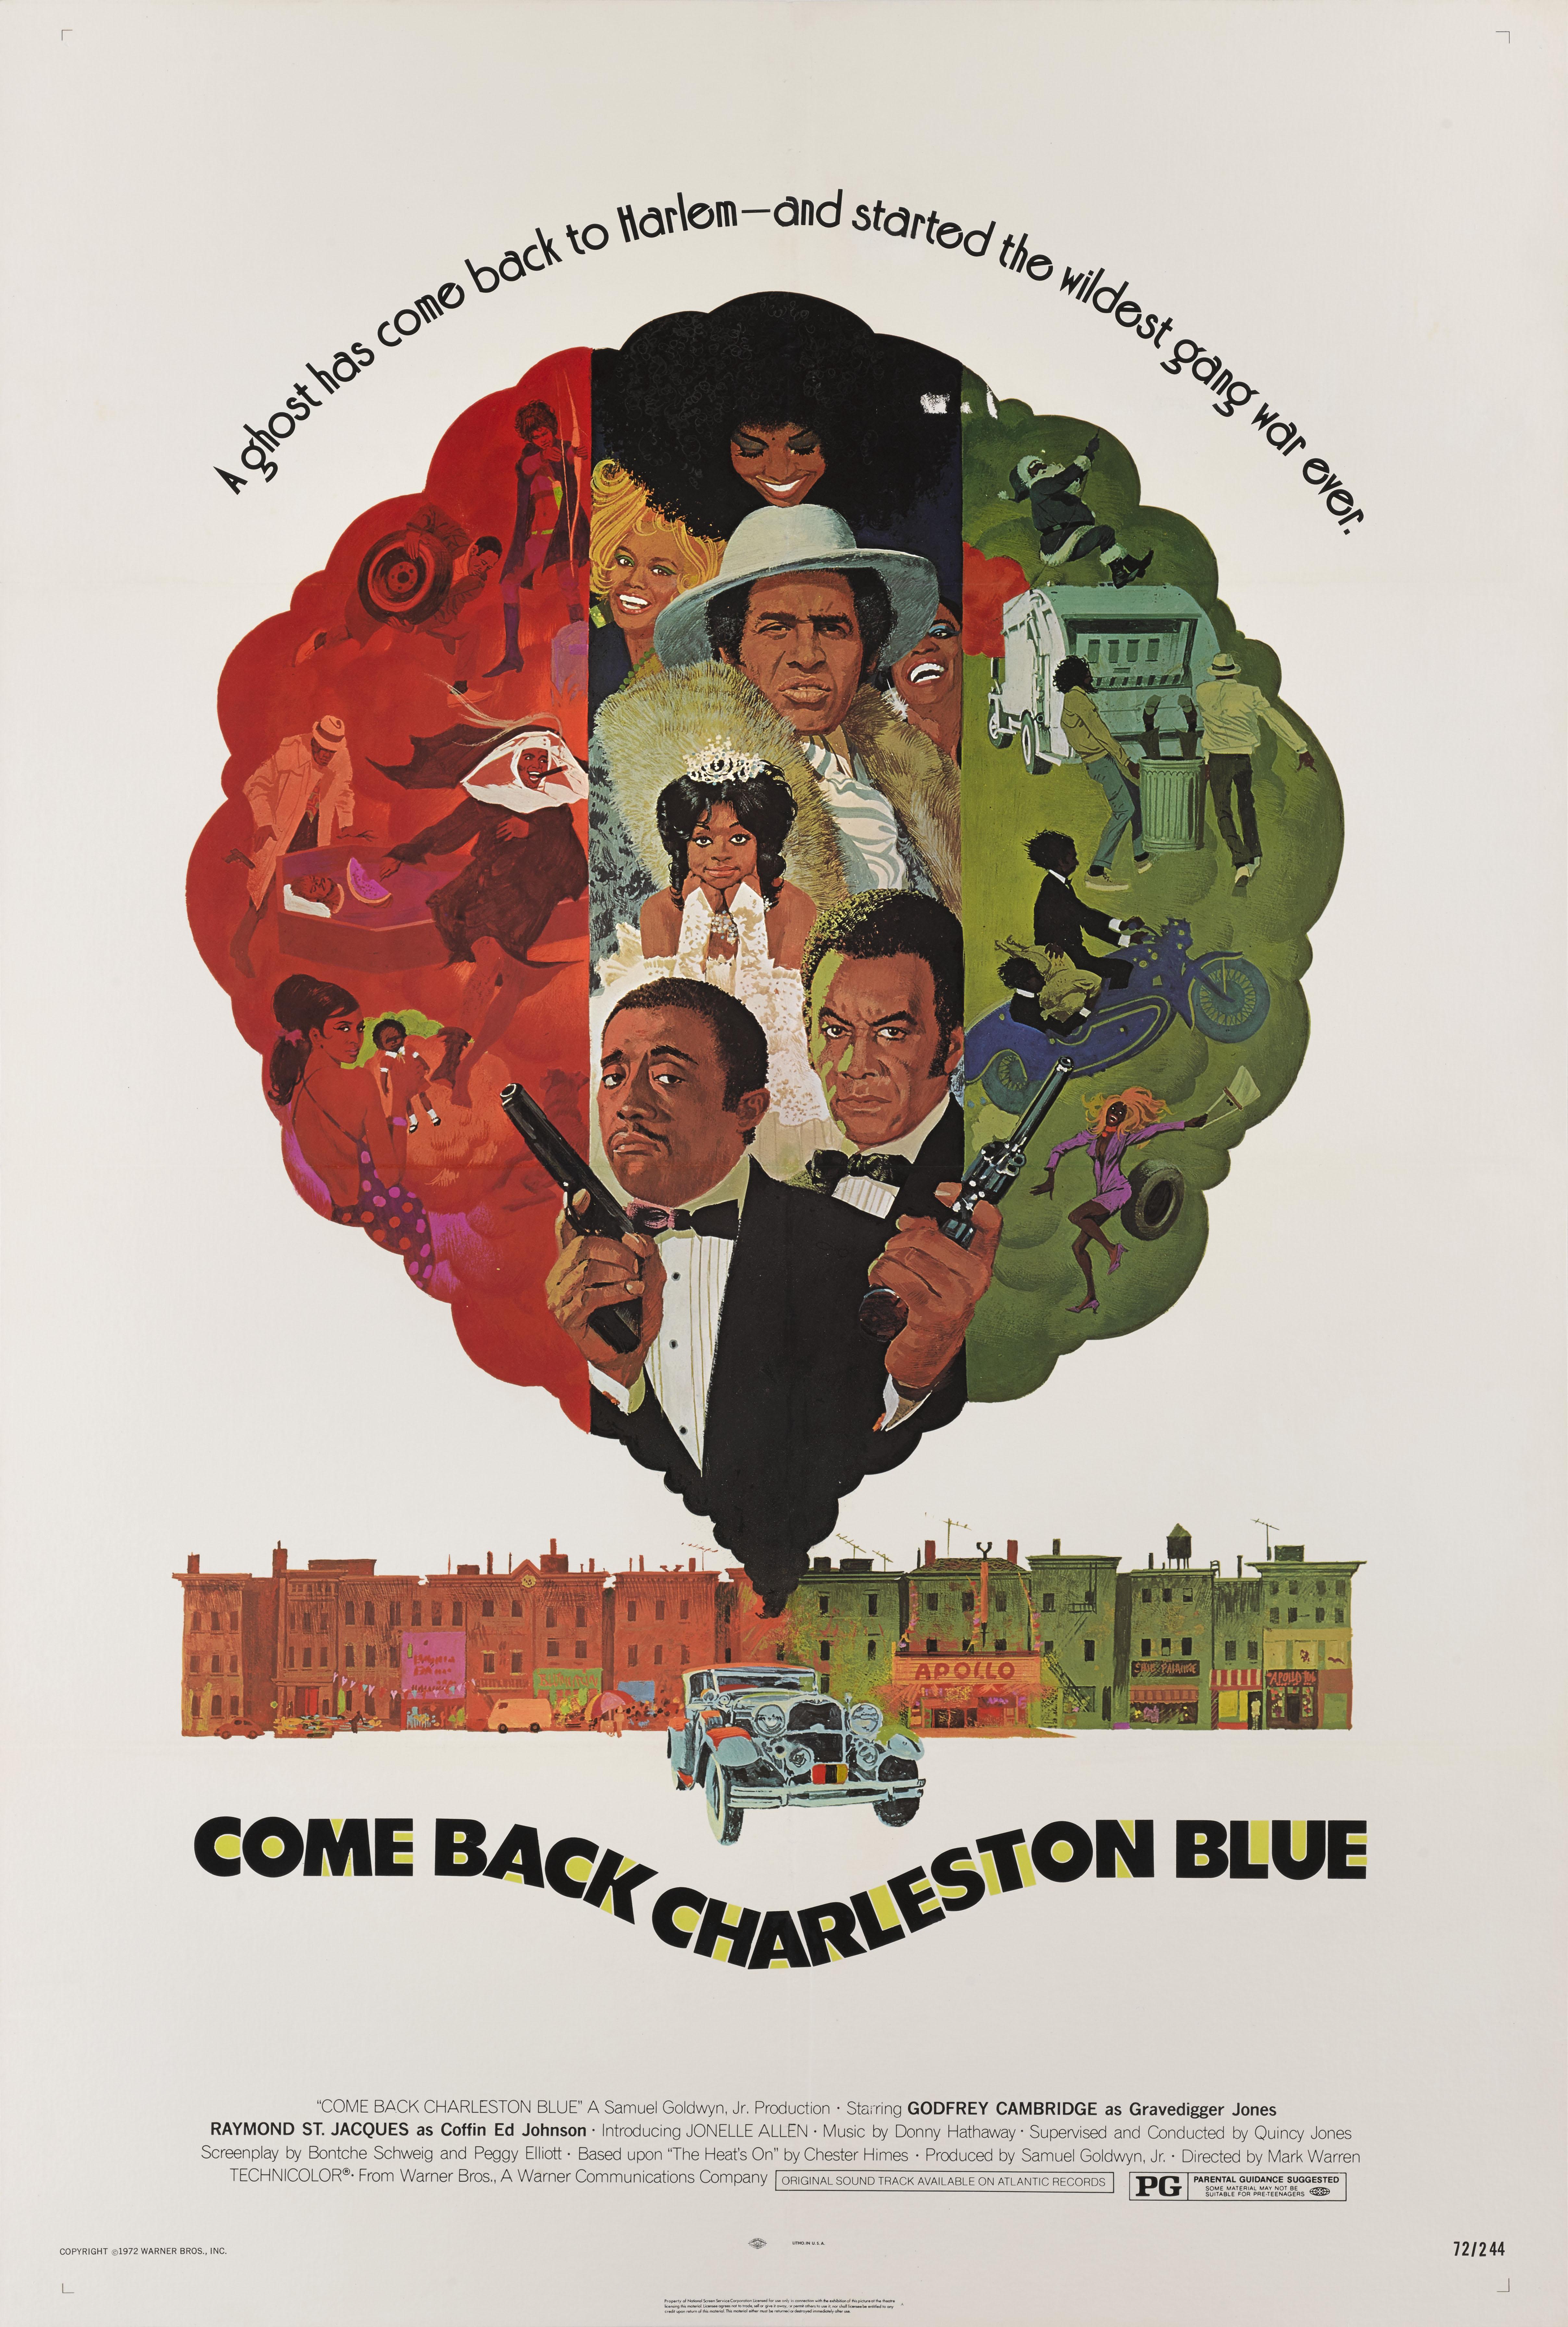 Original US film poster for the 1972 action comedy staring Godfrey Cambridge, Raymond St. Jacques and Peter De Anda and directed by Maek Warren.
This poster is conservation linen backed and it would be shipped rolled in a strong tube.